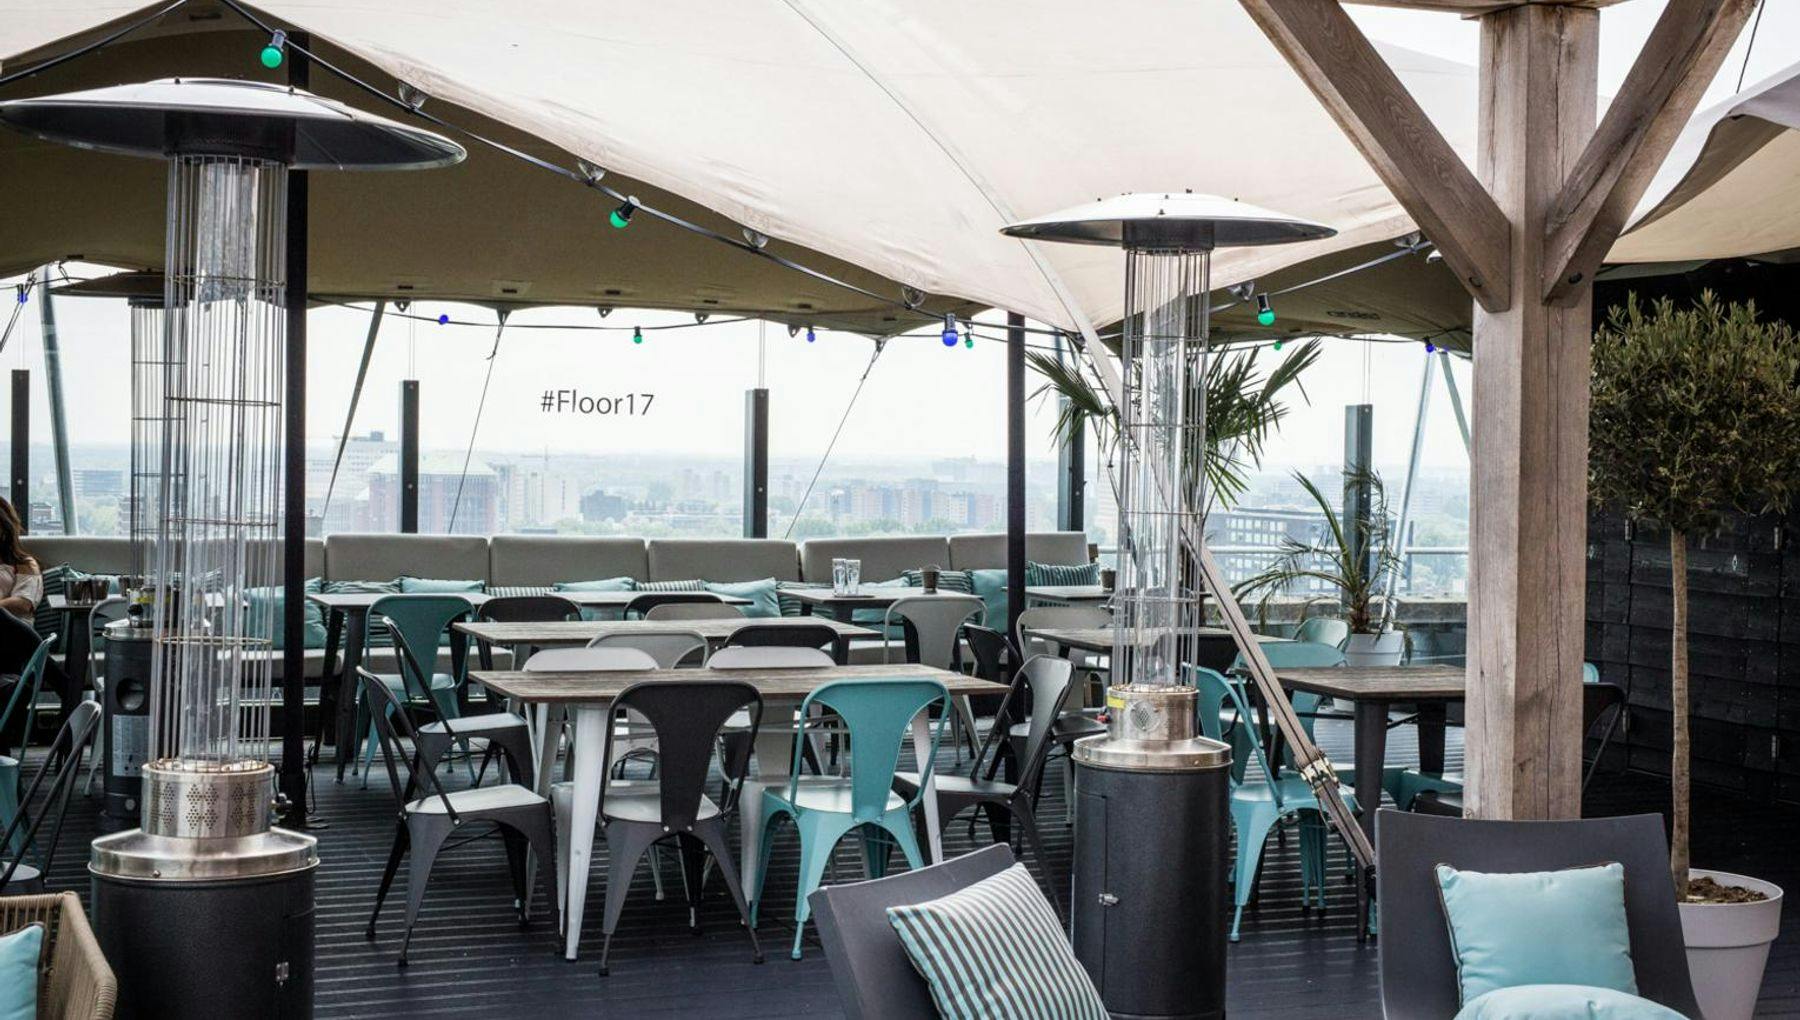 Floor17 rooftop restaurant and bar in Nieuw-West with a viewpoint over the city